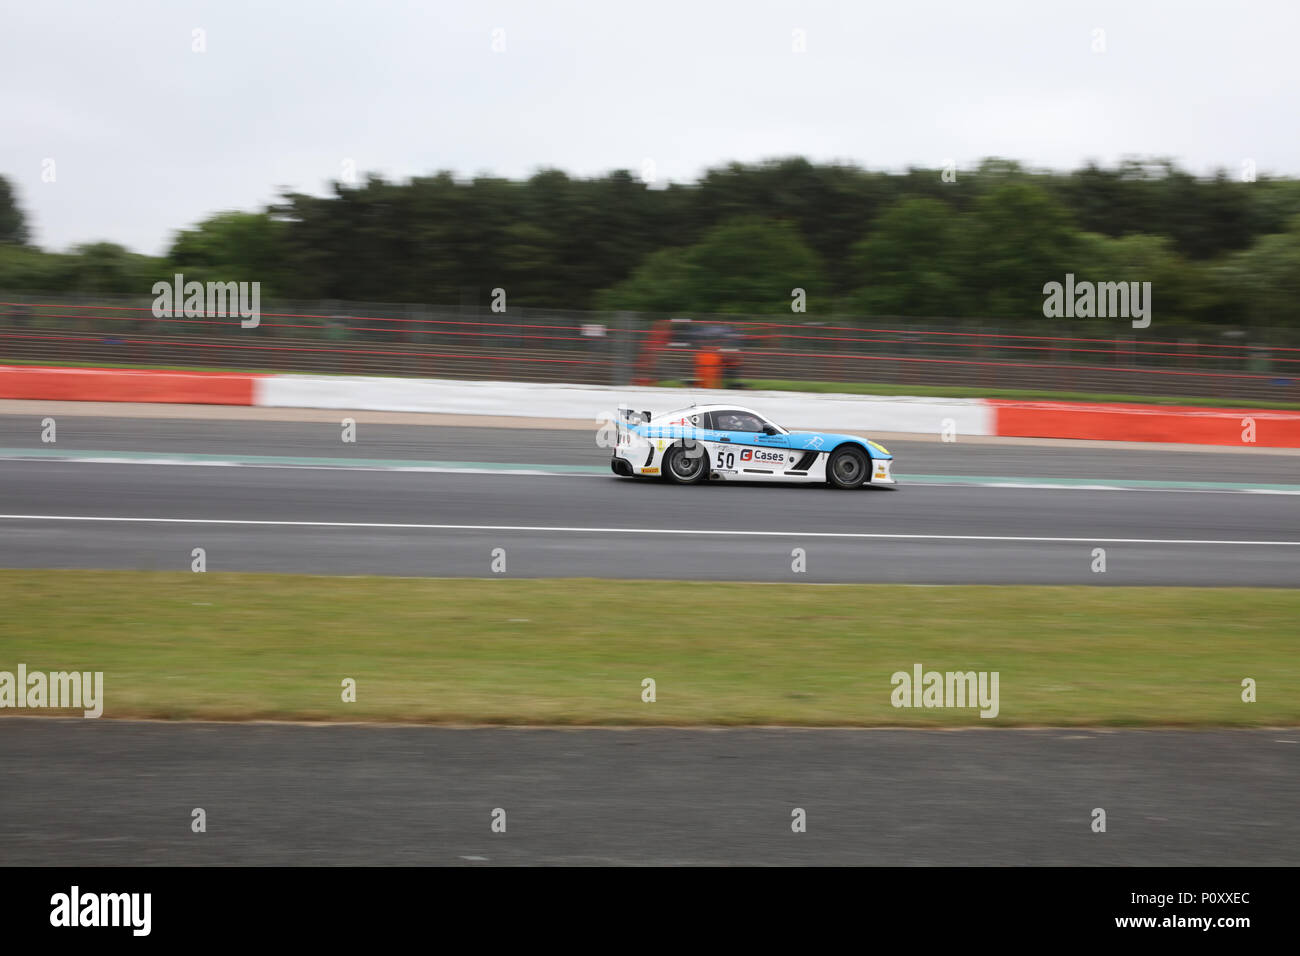 Silverstone, United Kingdom. 10th Jun, 2018. The Ginetta 50 car of HHC Motorsport and Mike Newbould / Will Burns on circuit for the British GT at Silverstone Warmup session Credit: Paren Raval/Alamy Live News Stock Photo